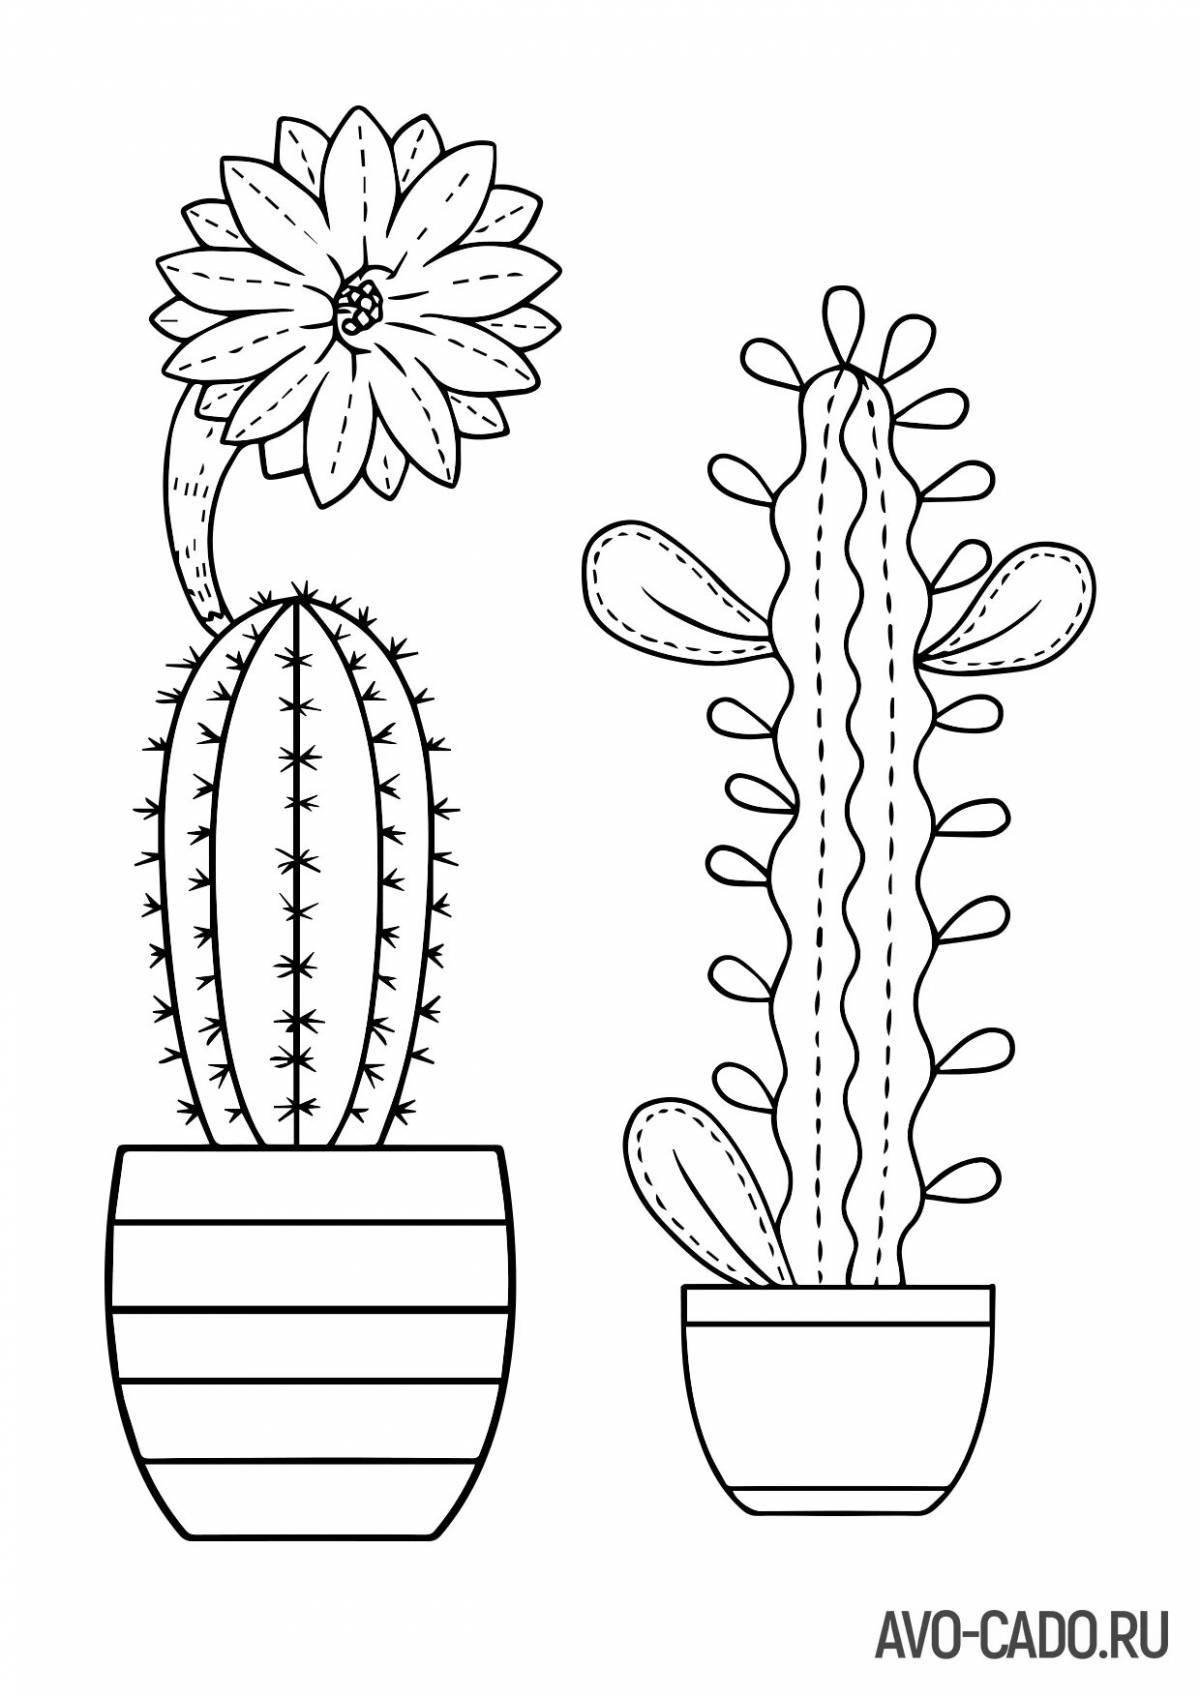 Colorful cactus coloring book for kids